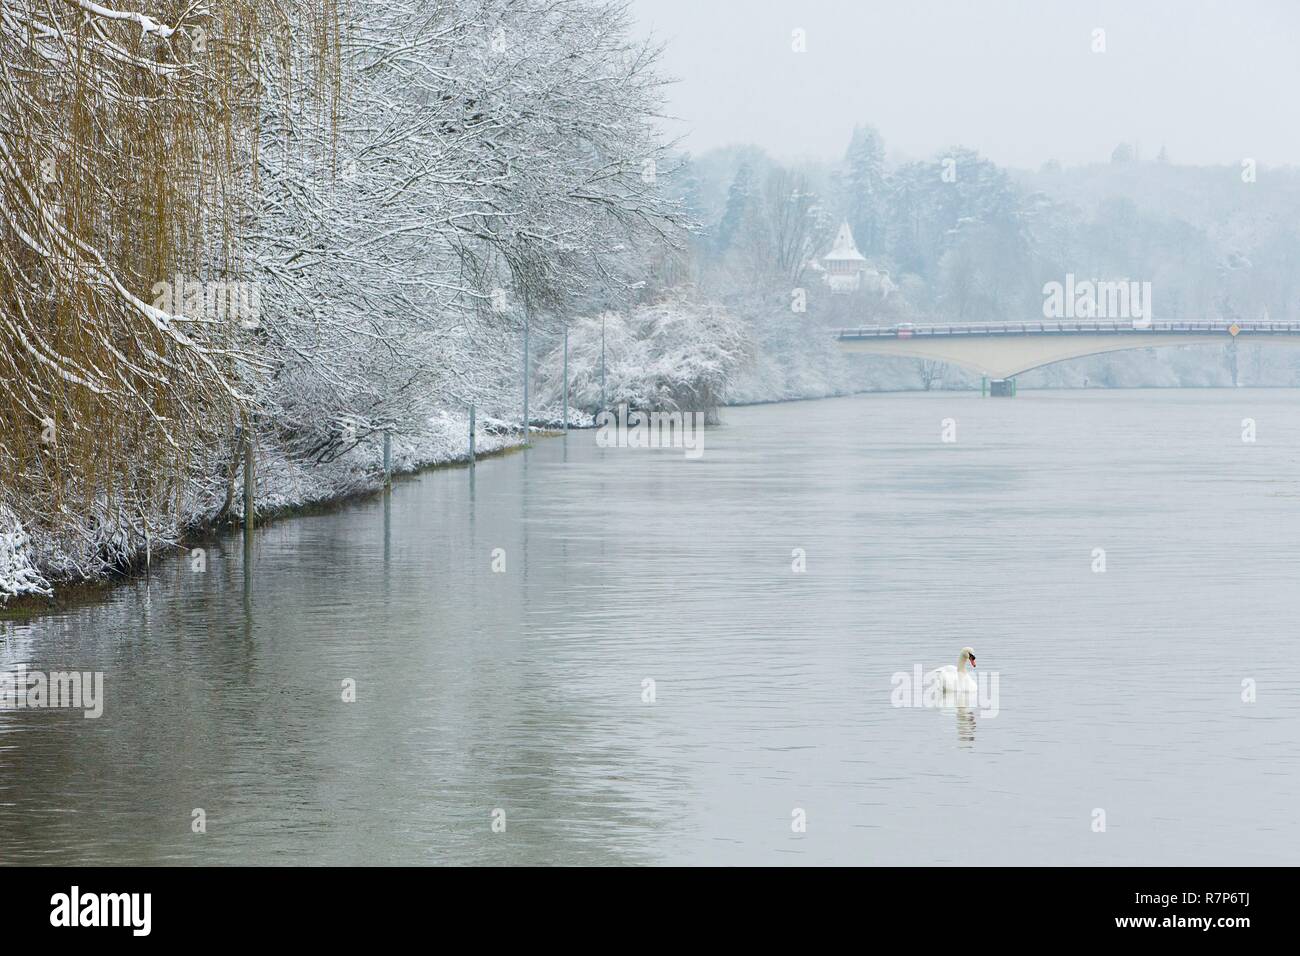 France, Seine et Marne, Bois le Roi, the riverbank of the Seine river under the snow along Quai Olivier Metra during the flooding, the bridge between Chartrettes and Bois le Roi and 1900's style mansion named Affolante du Bord de Seine on Quai de la Ruelle in the background Stock Photo